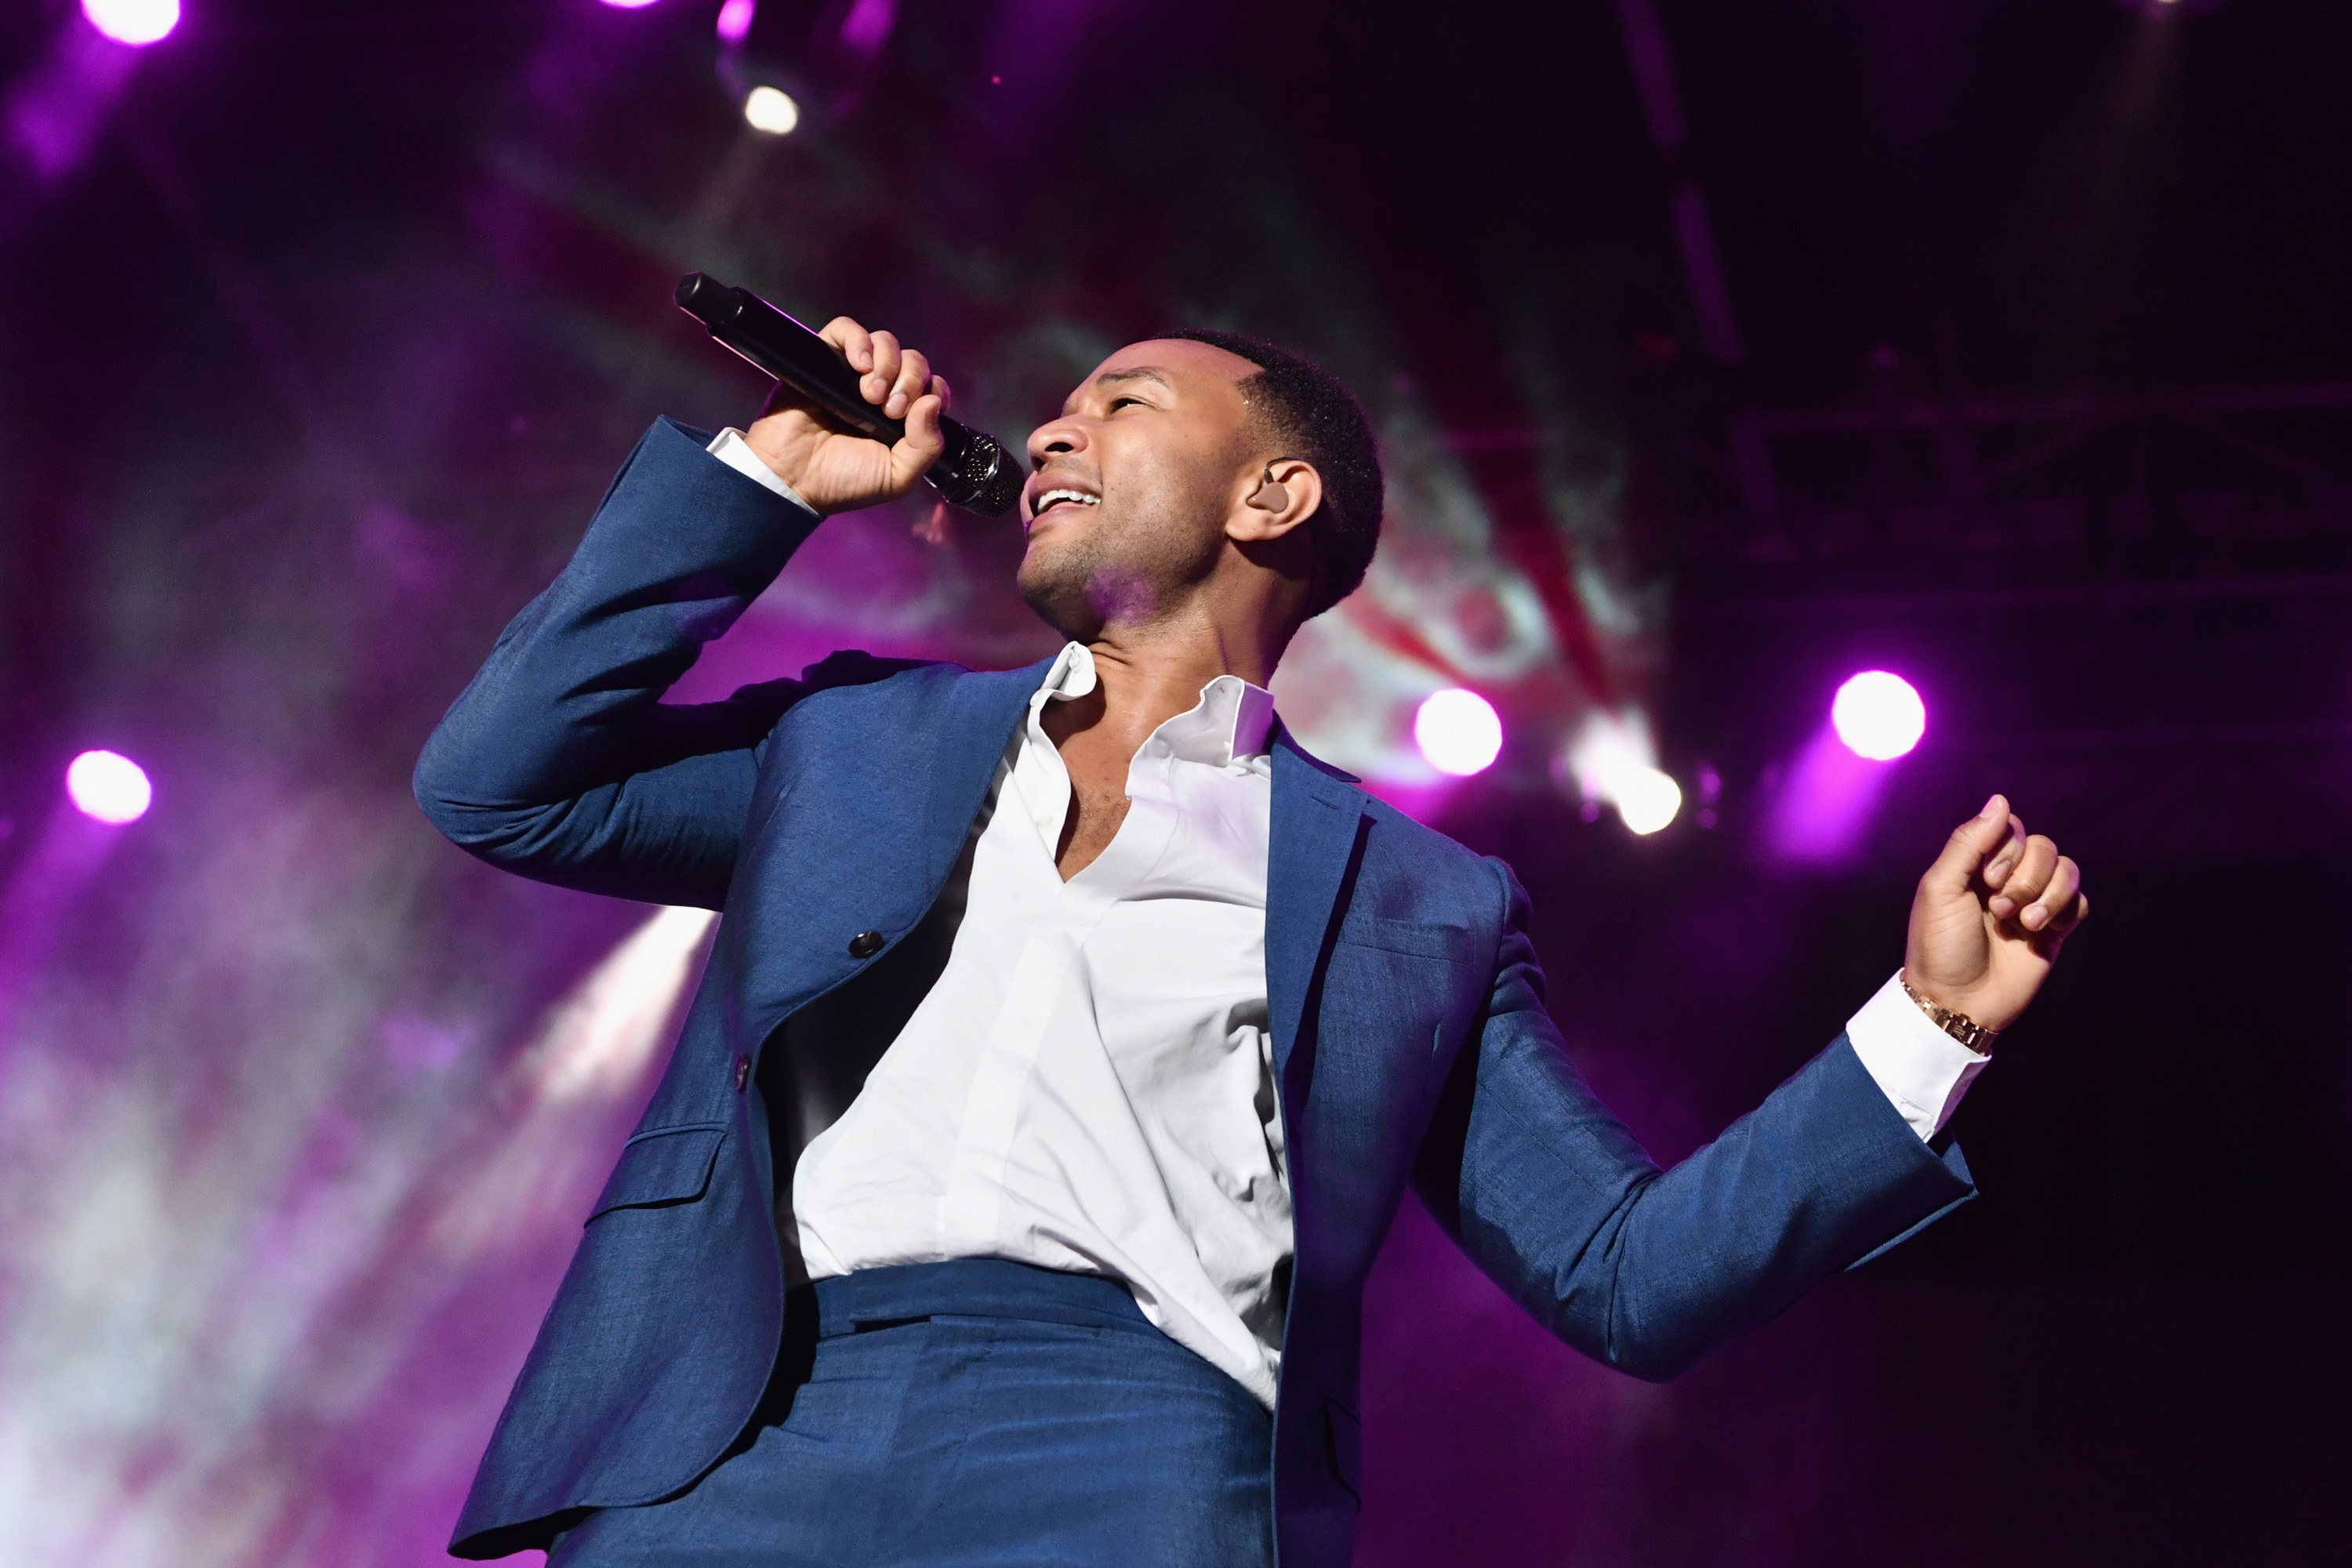 John Legend performs on stage at the Fourth Annual Los Angeles Dodgers Foundation Blue Diamond Gala at Dodger Stadium on June 11, 2018